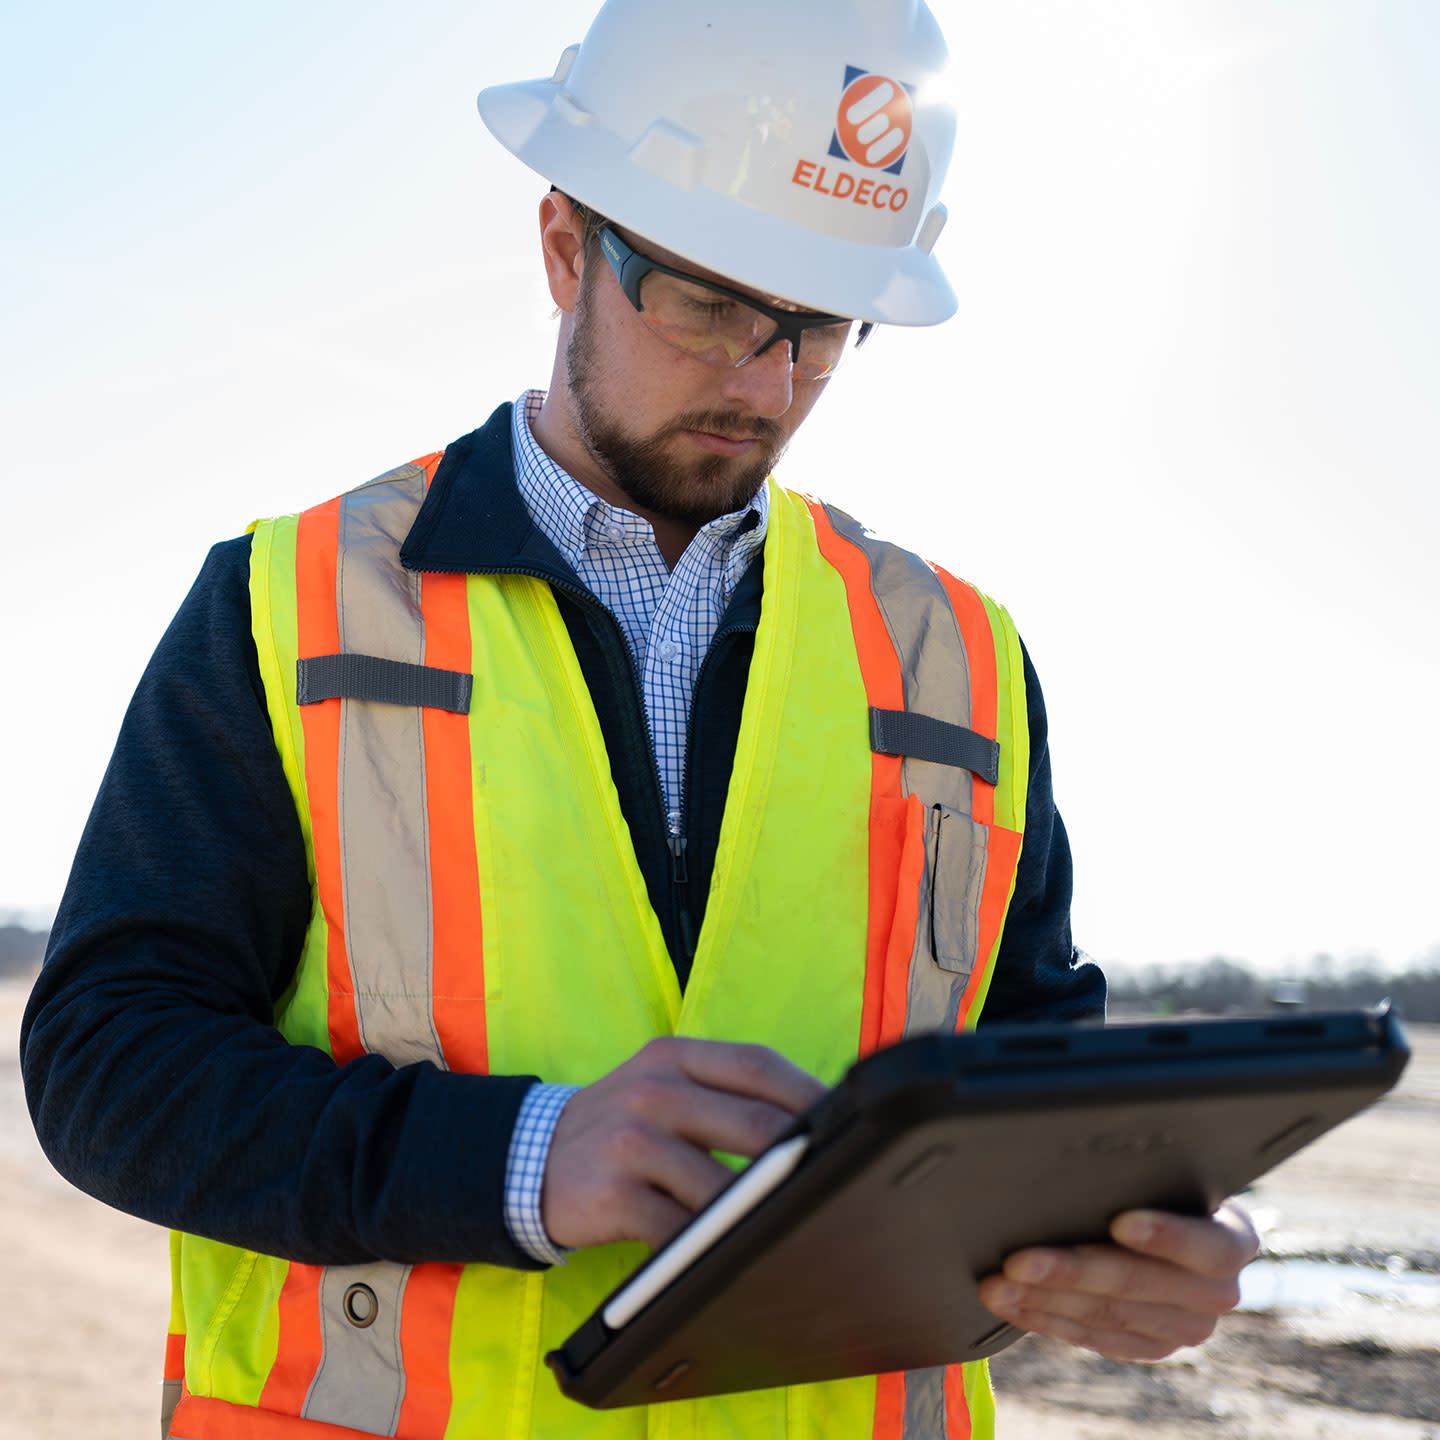 Construction worker using tablet on a jobsite